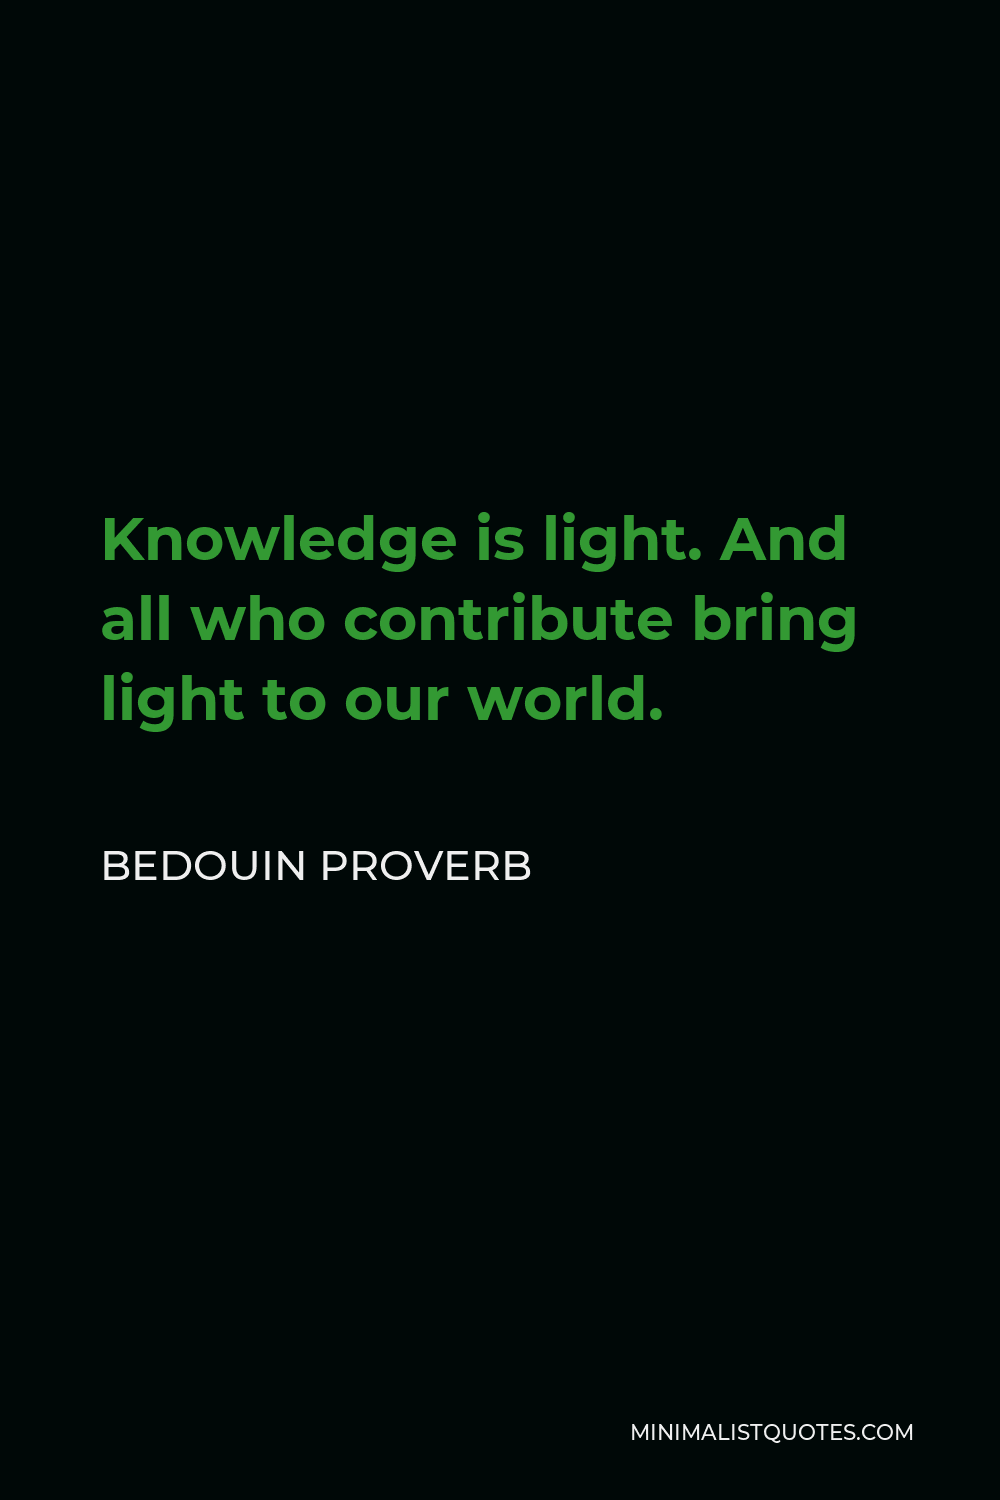 Bedouin Proverb Quote - Knowledge is light. And all who contribute bring light to our world.